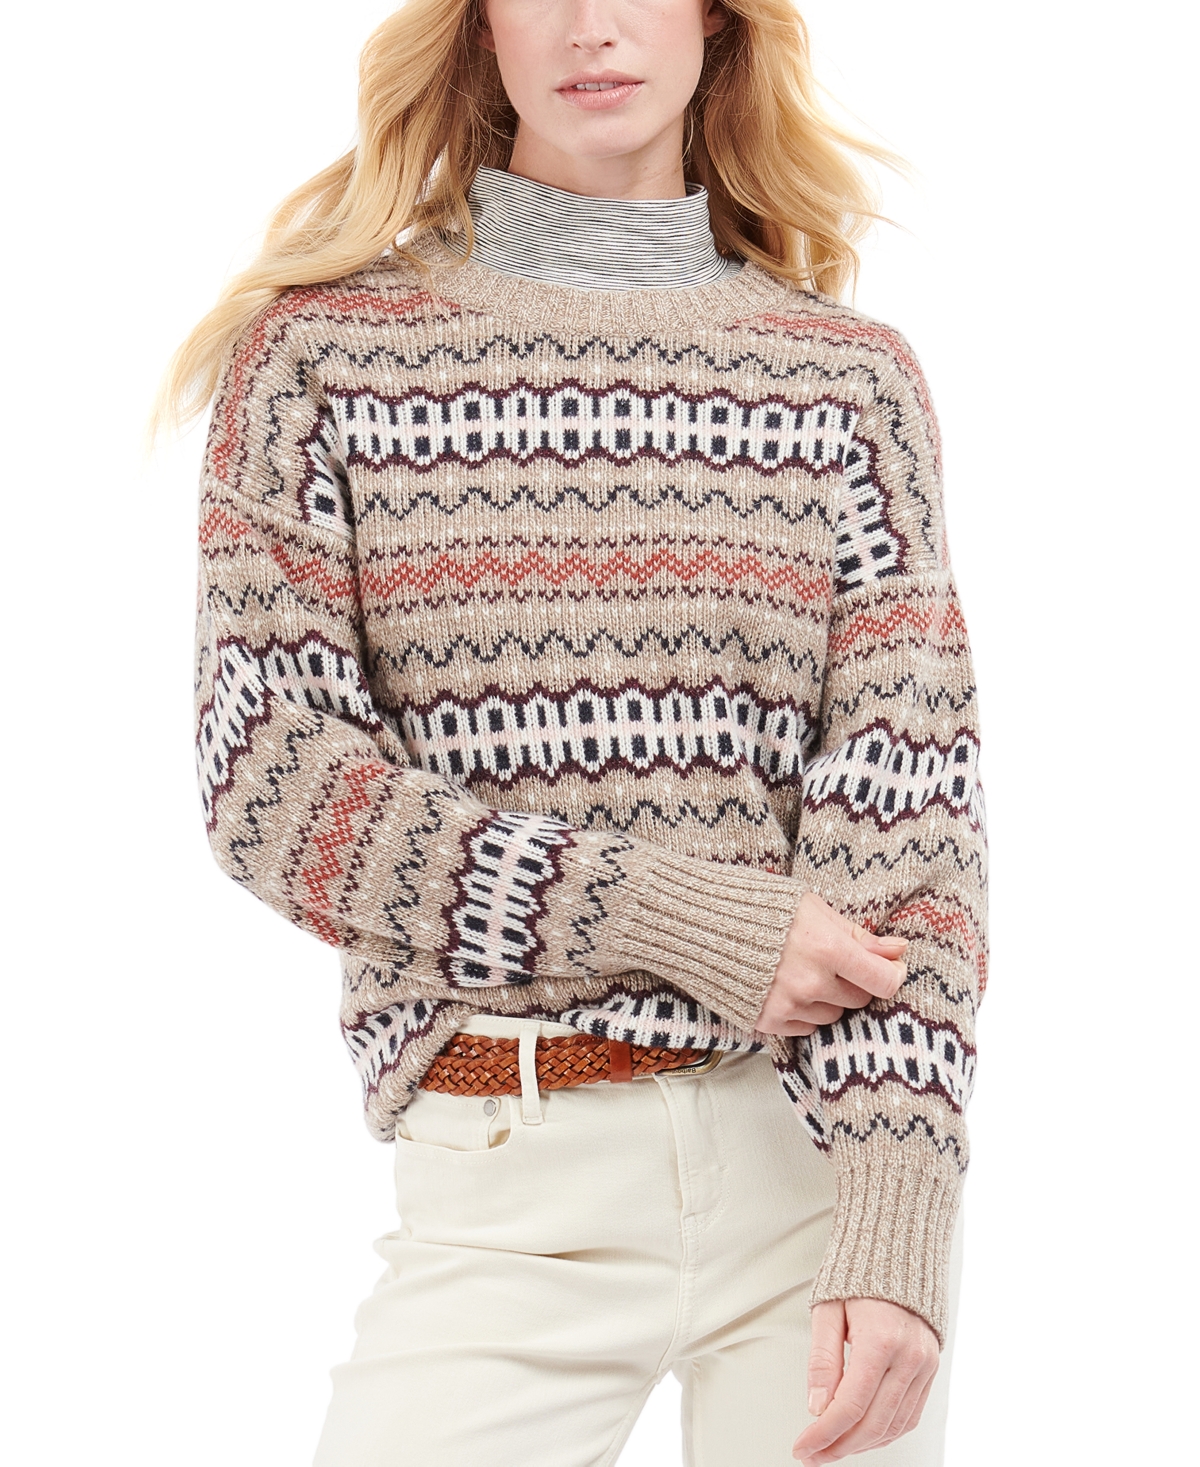 Barbour Reedley Knit Sweater